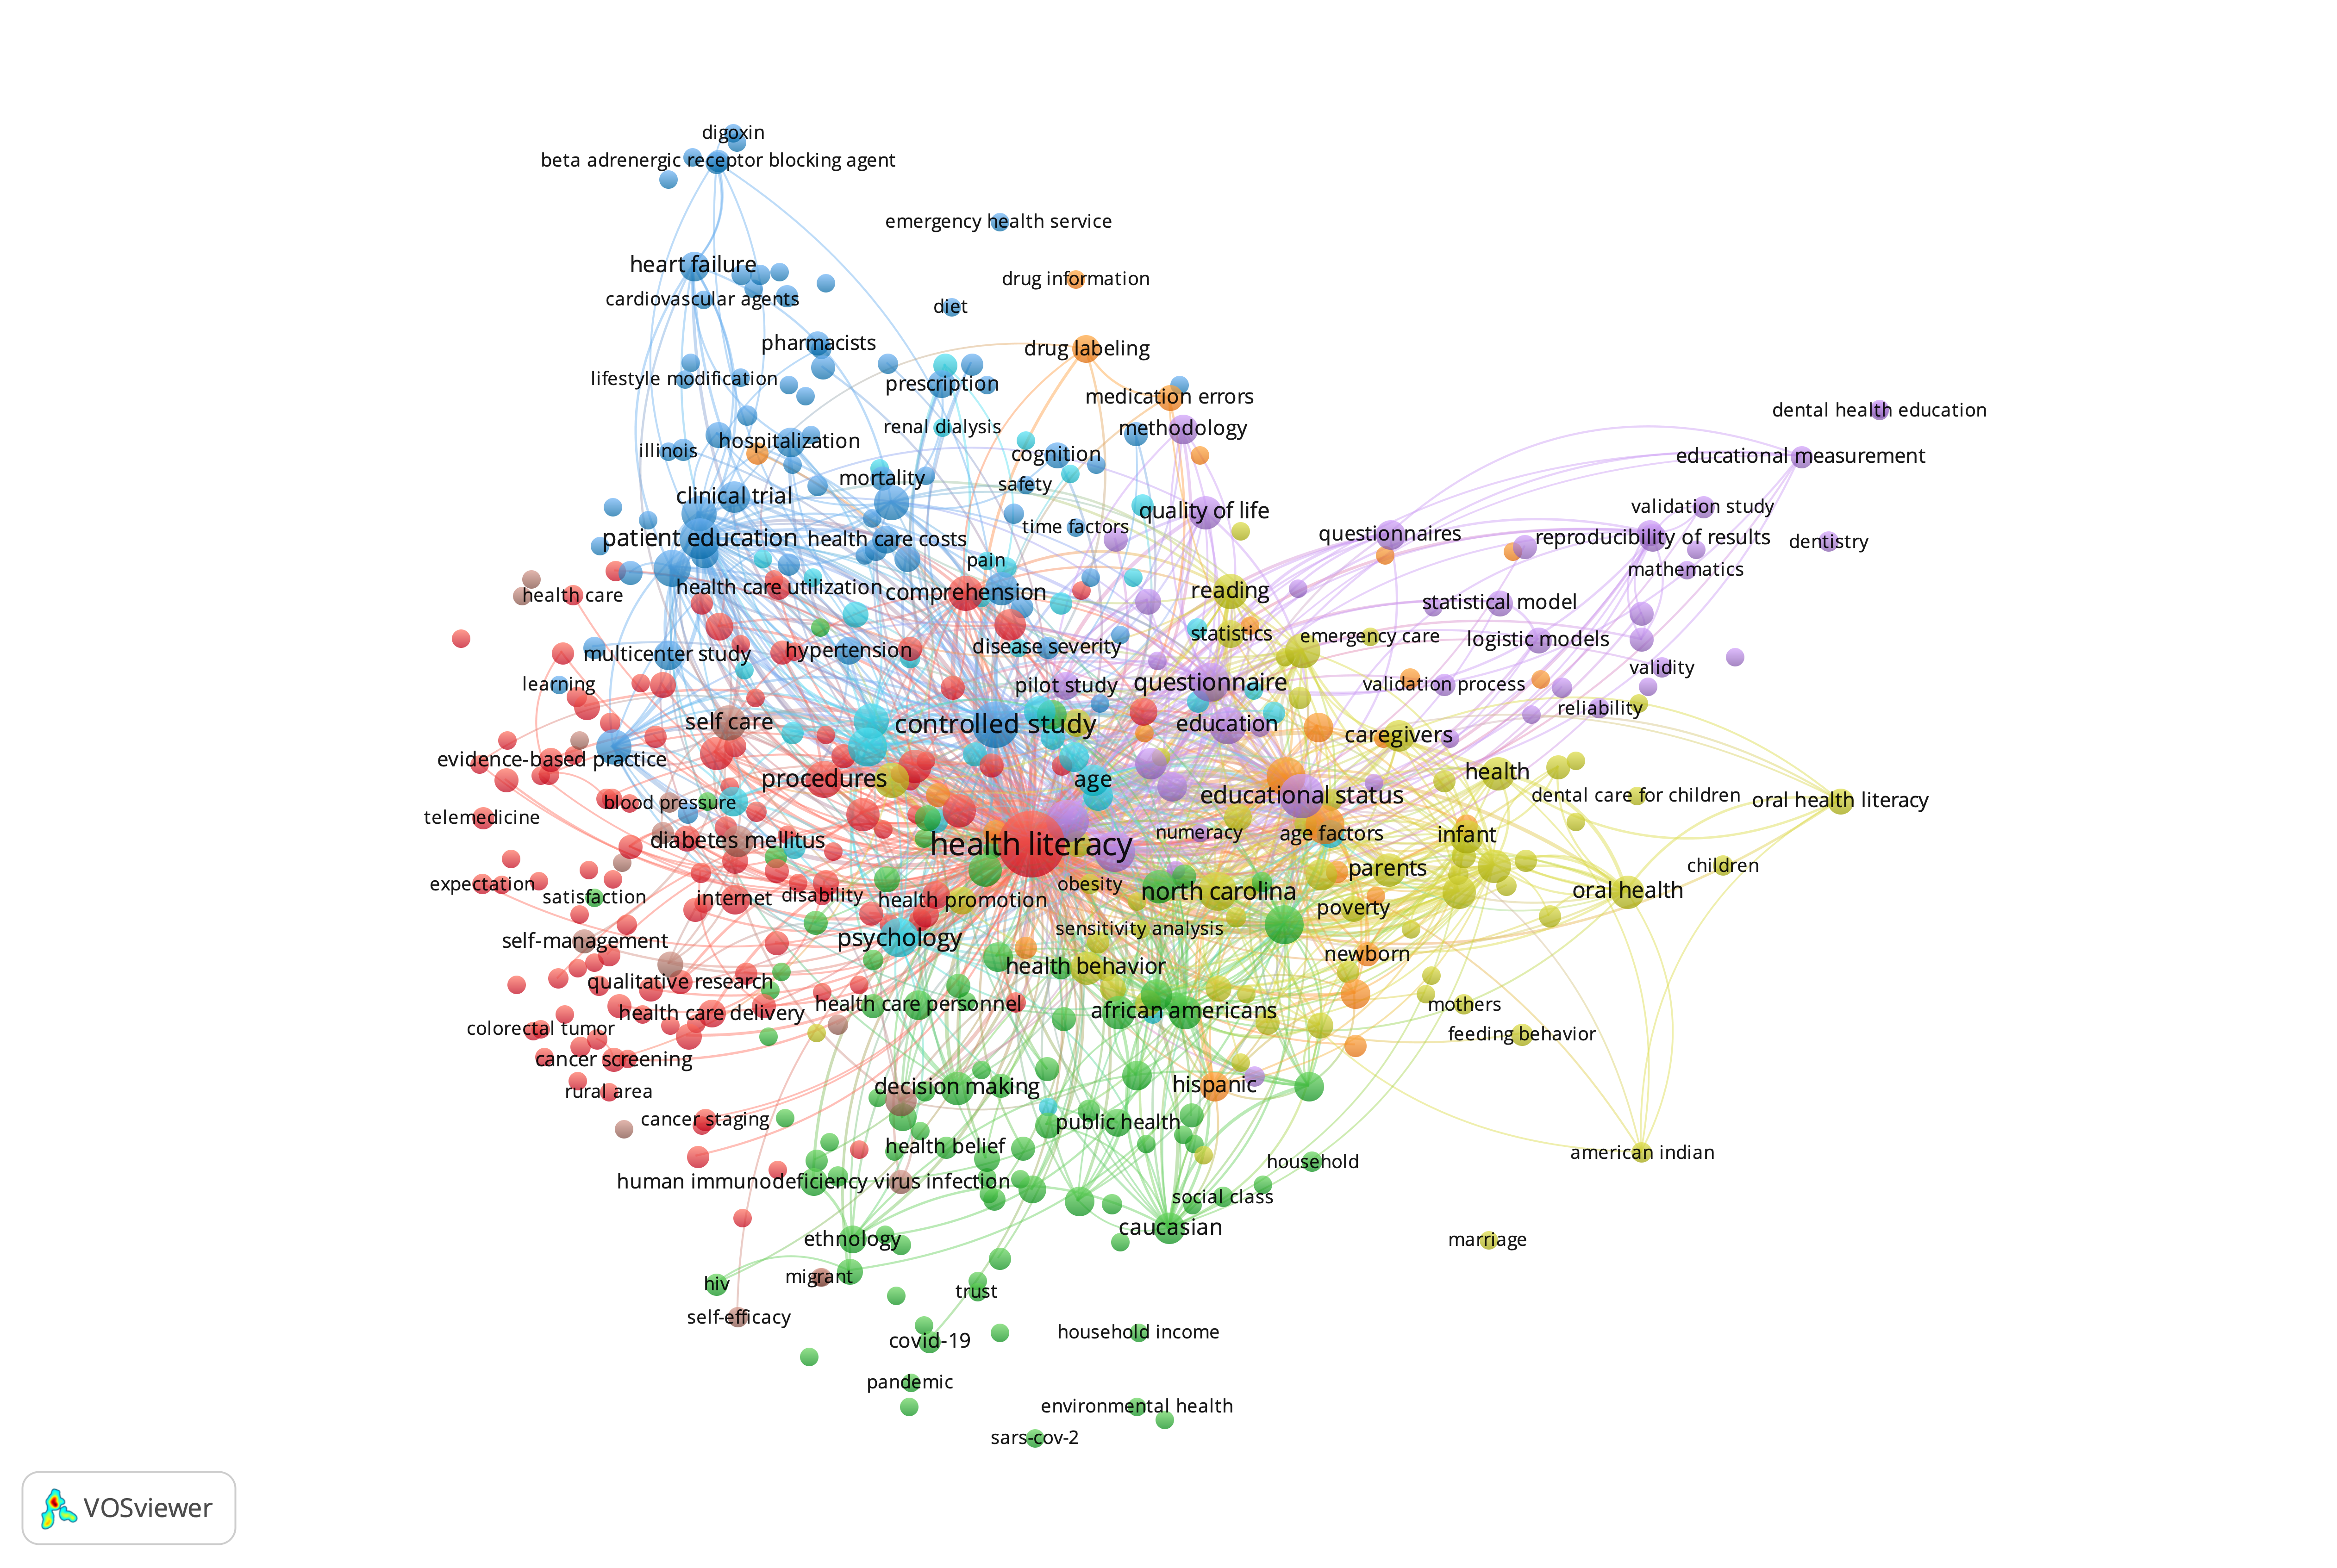 Visualization represents the range of health literacy topics published by researchers at UNC